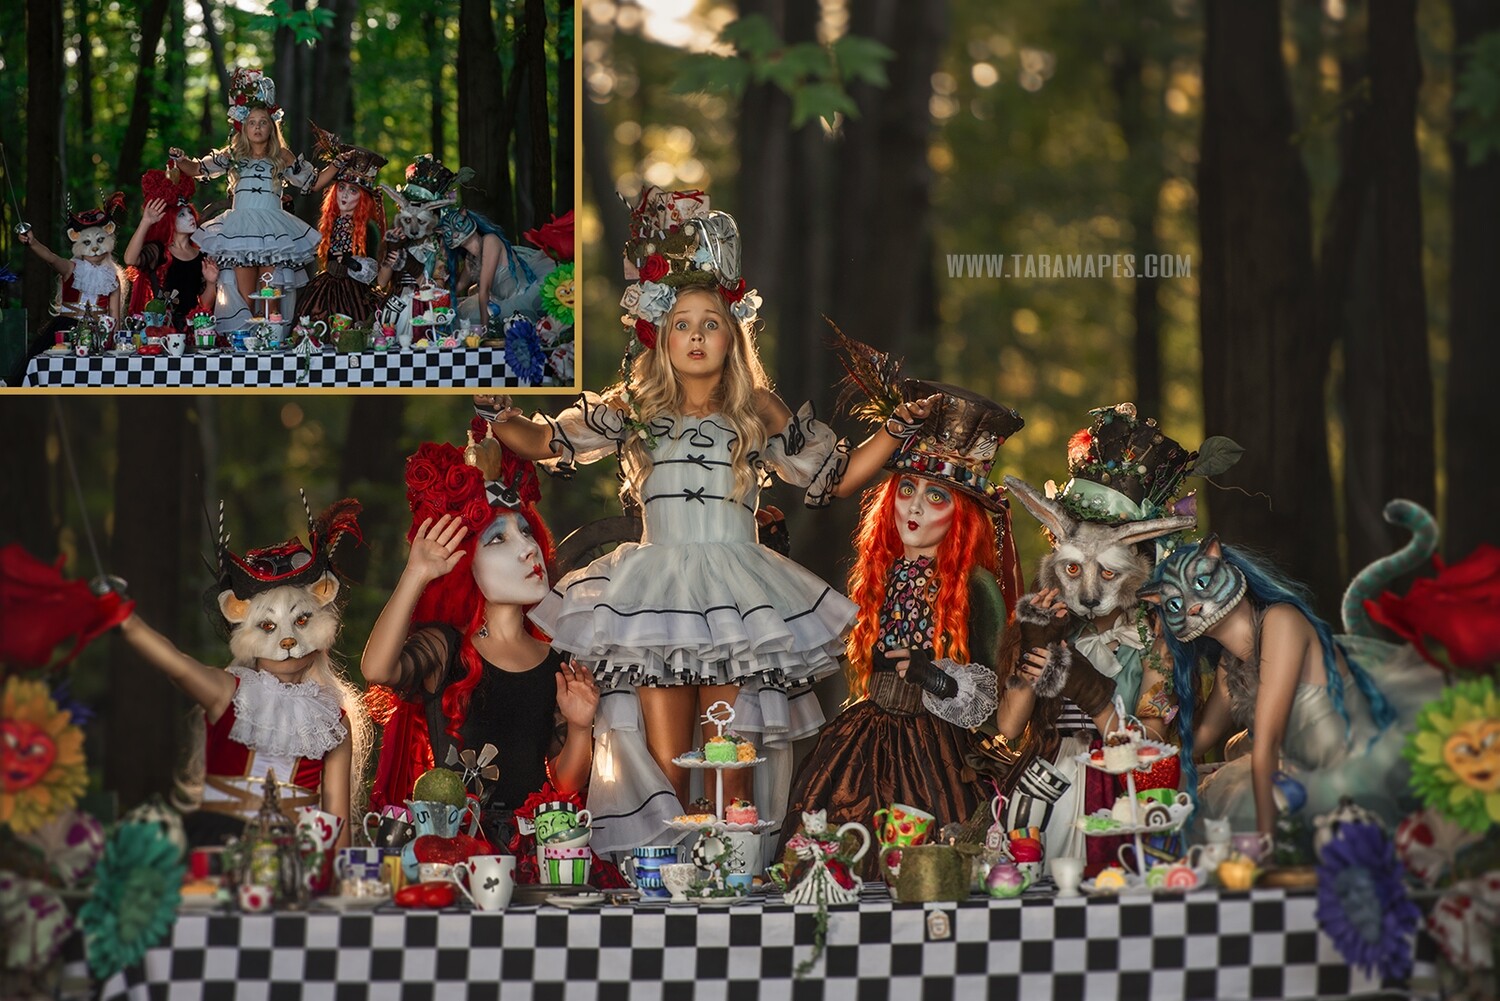 The Tea Party Painterly Editing and Compositing Photoshop Tutorial by Tara Mapes - Alice in Wonderland Inspired